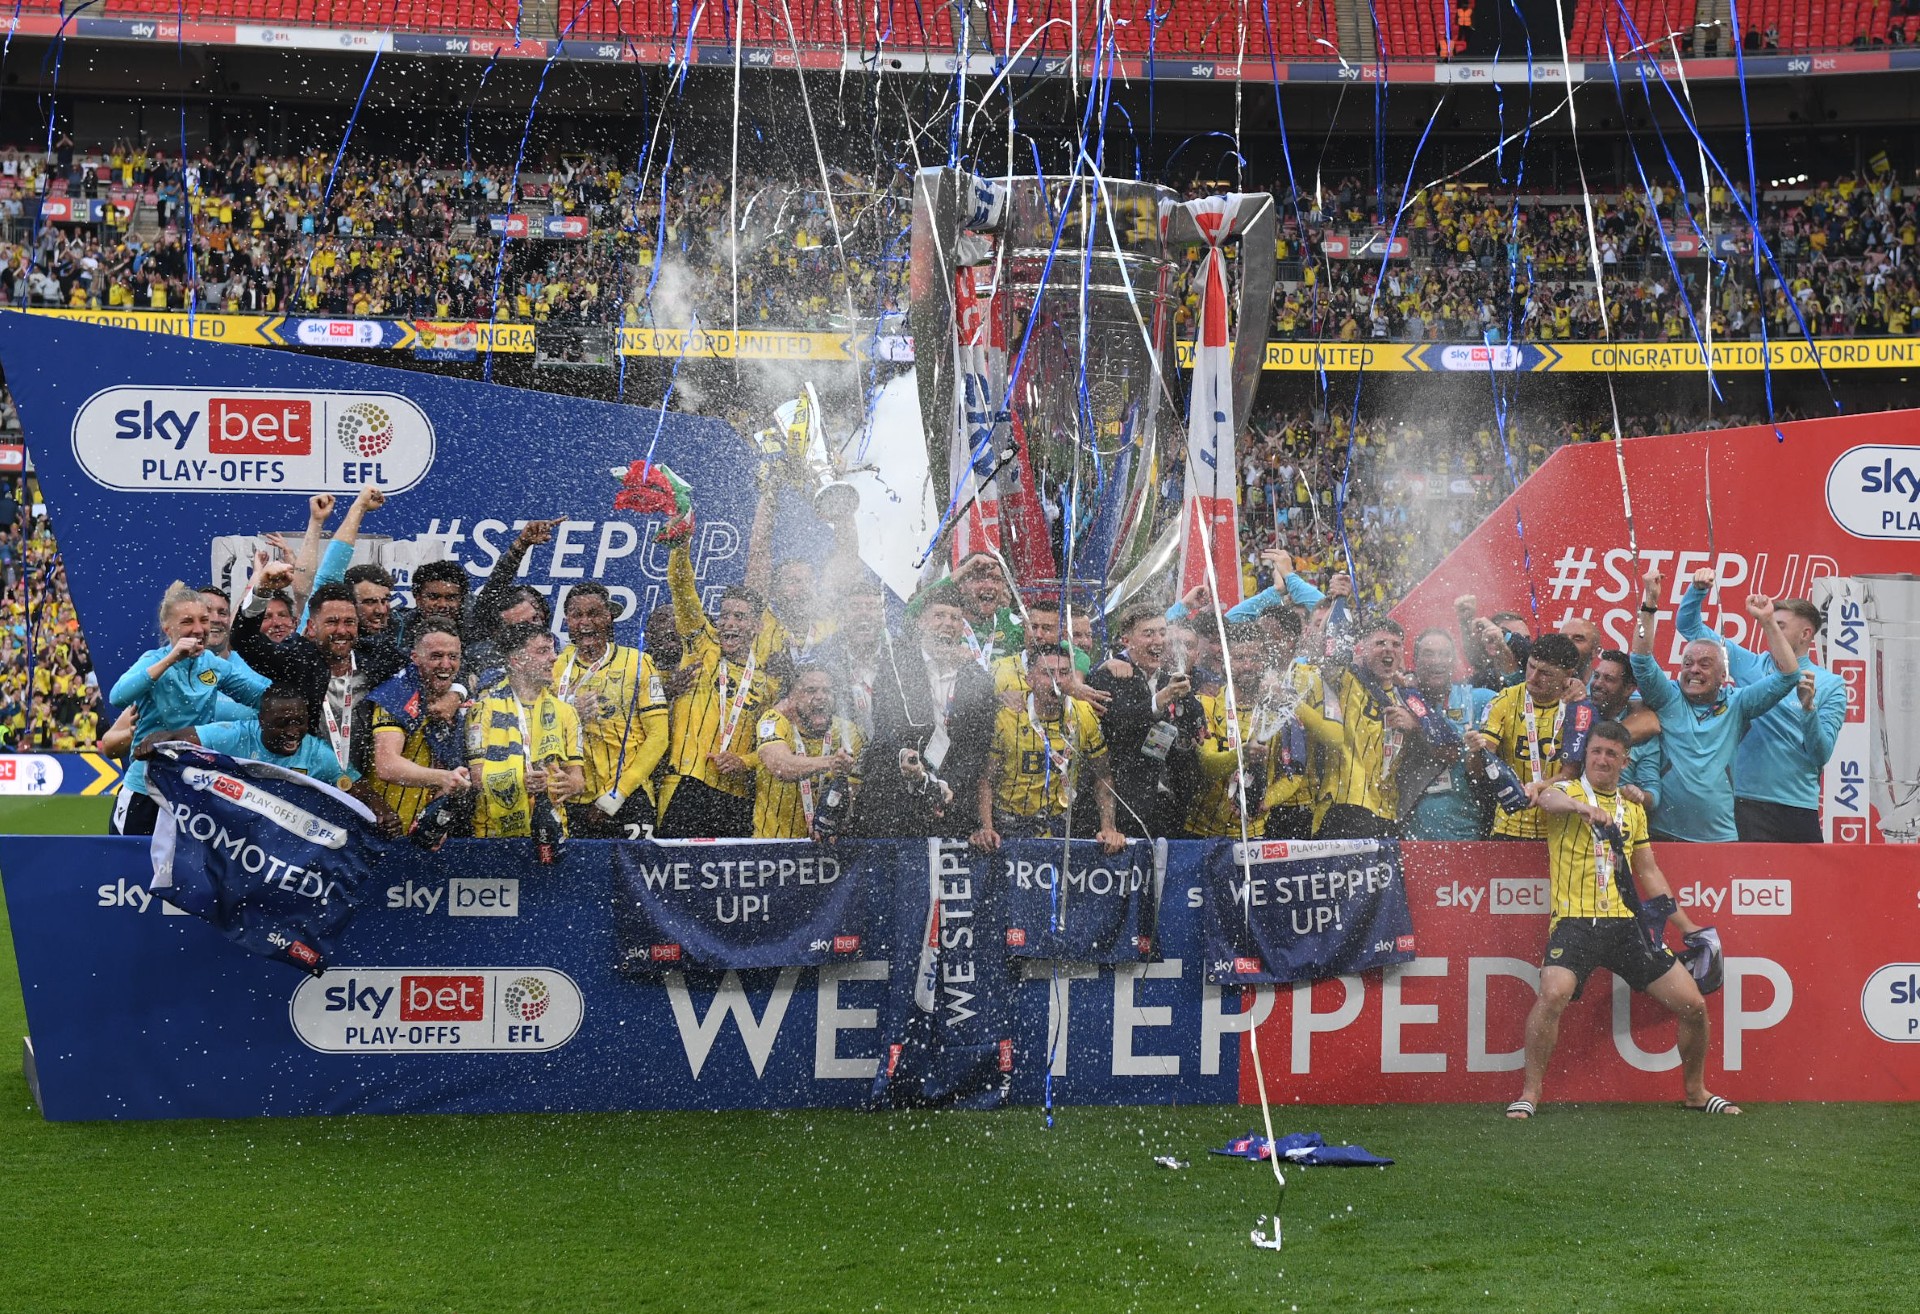 Oxford United announce open top bus tour celebration in city